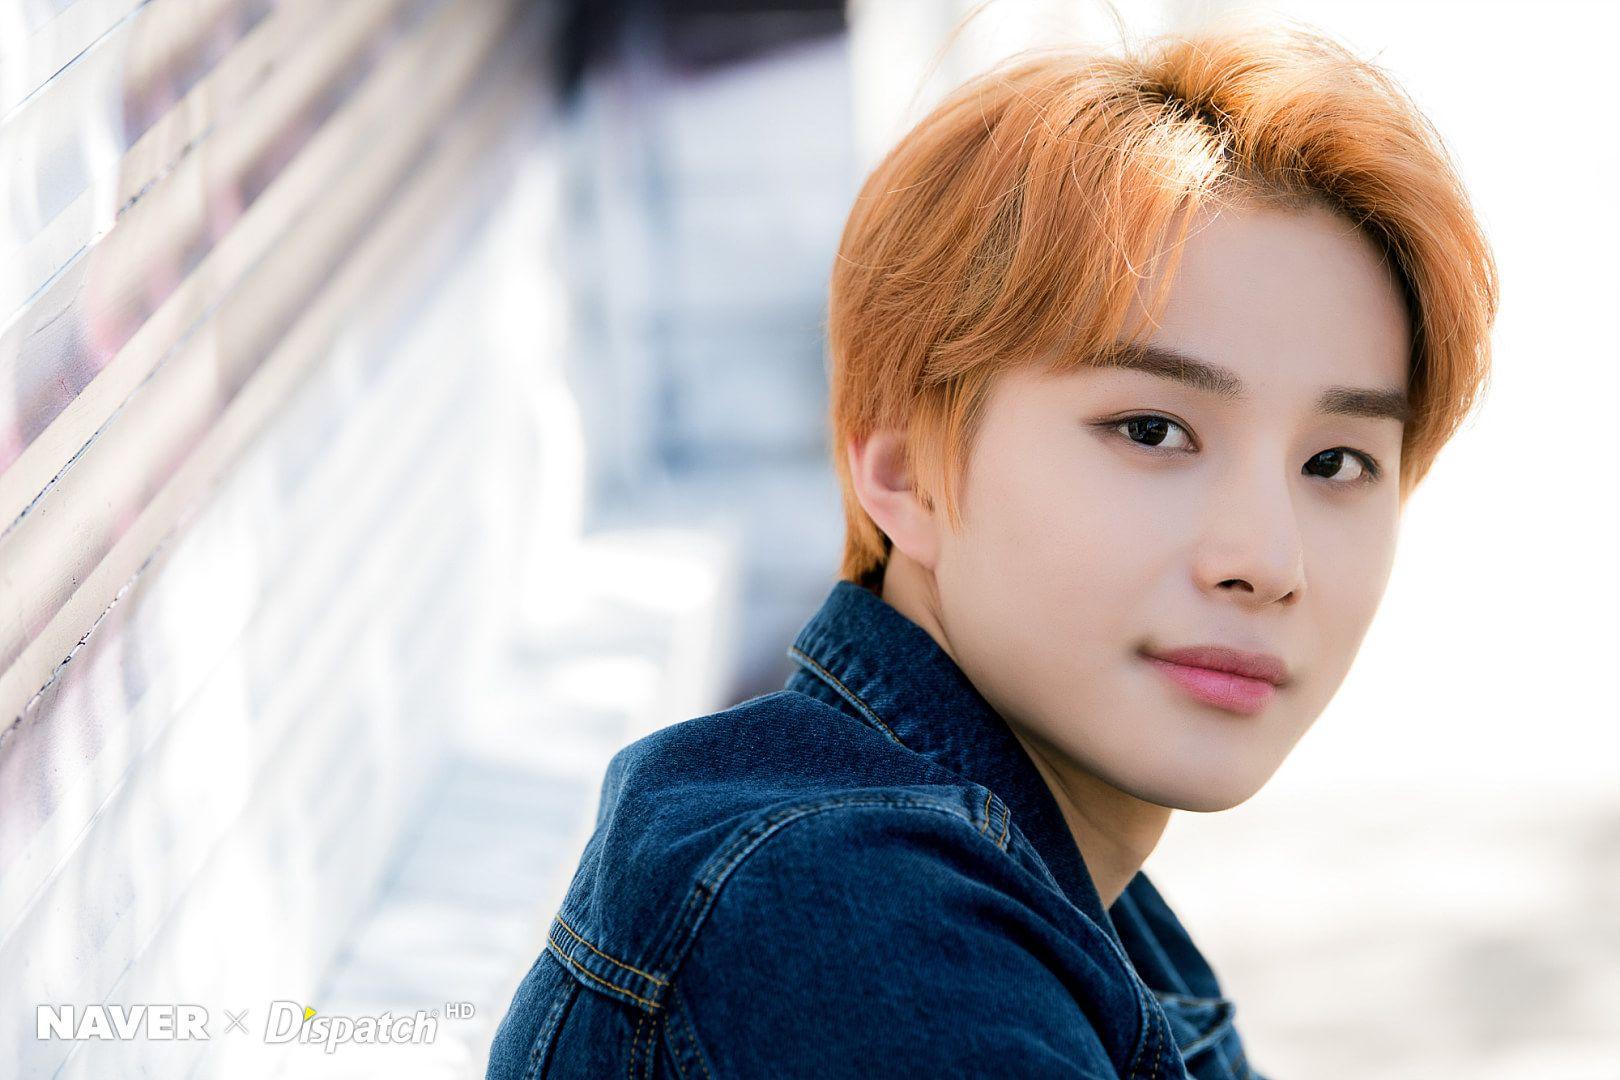 NAVER x DISPATCH NCT's Jungwoo at Downtown LA, USA 181011